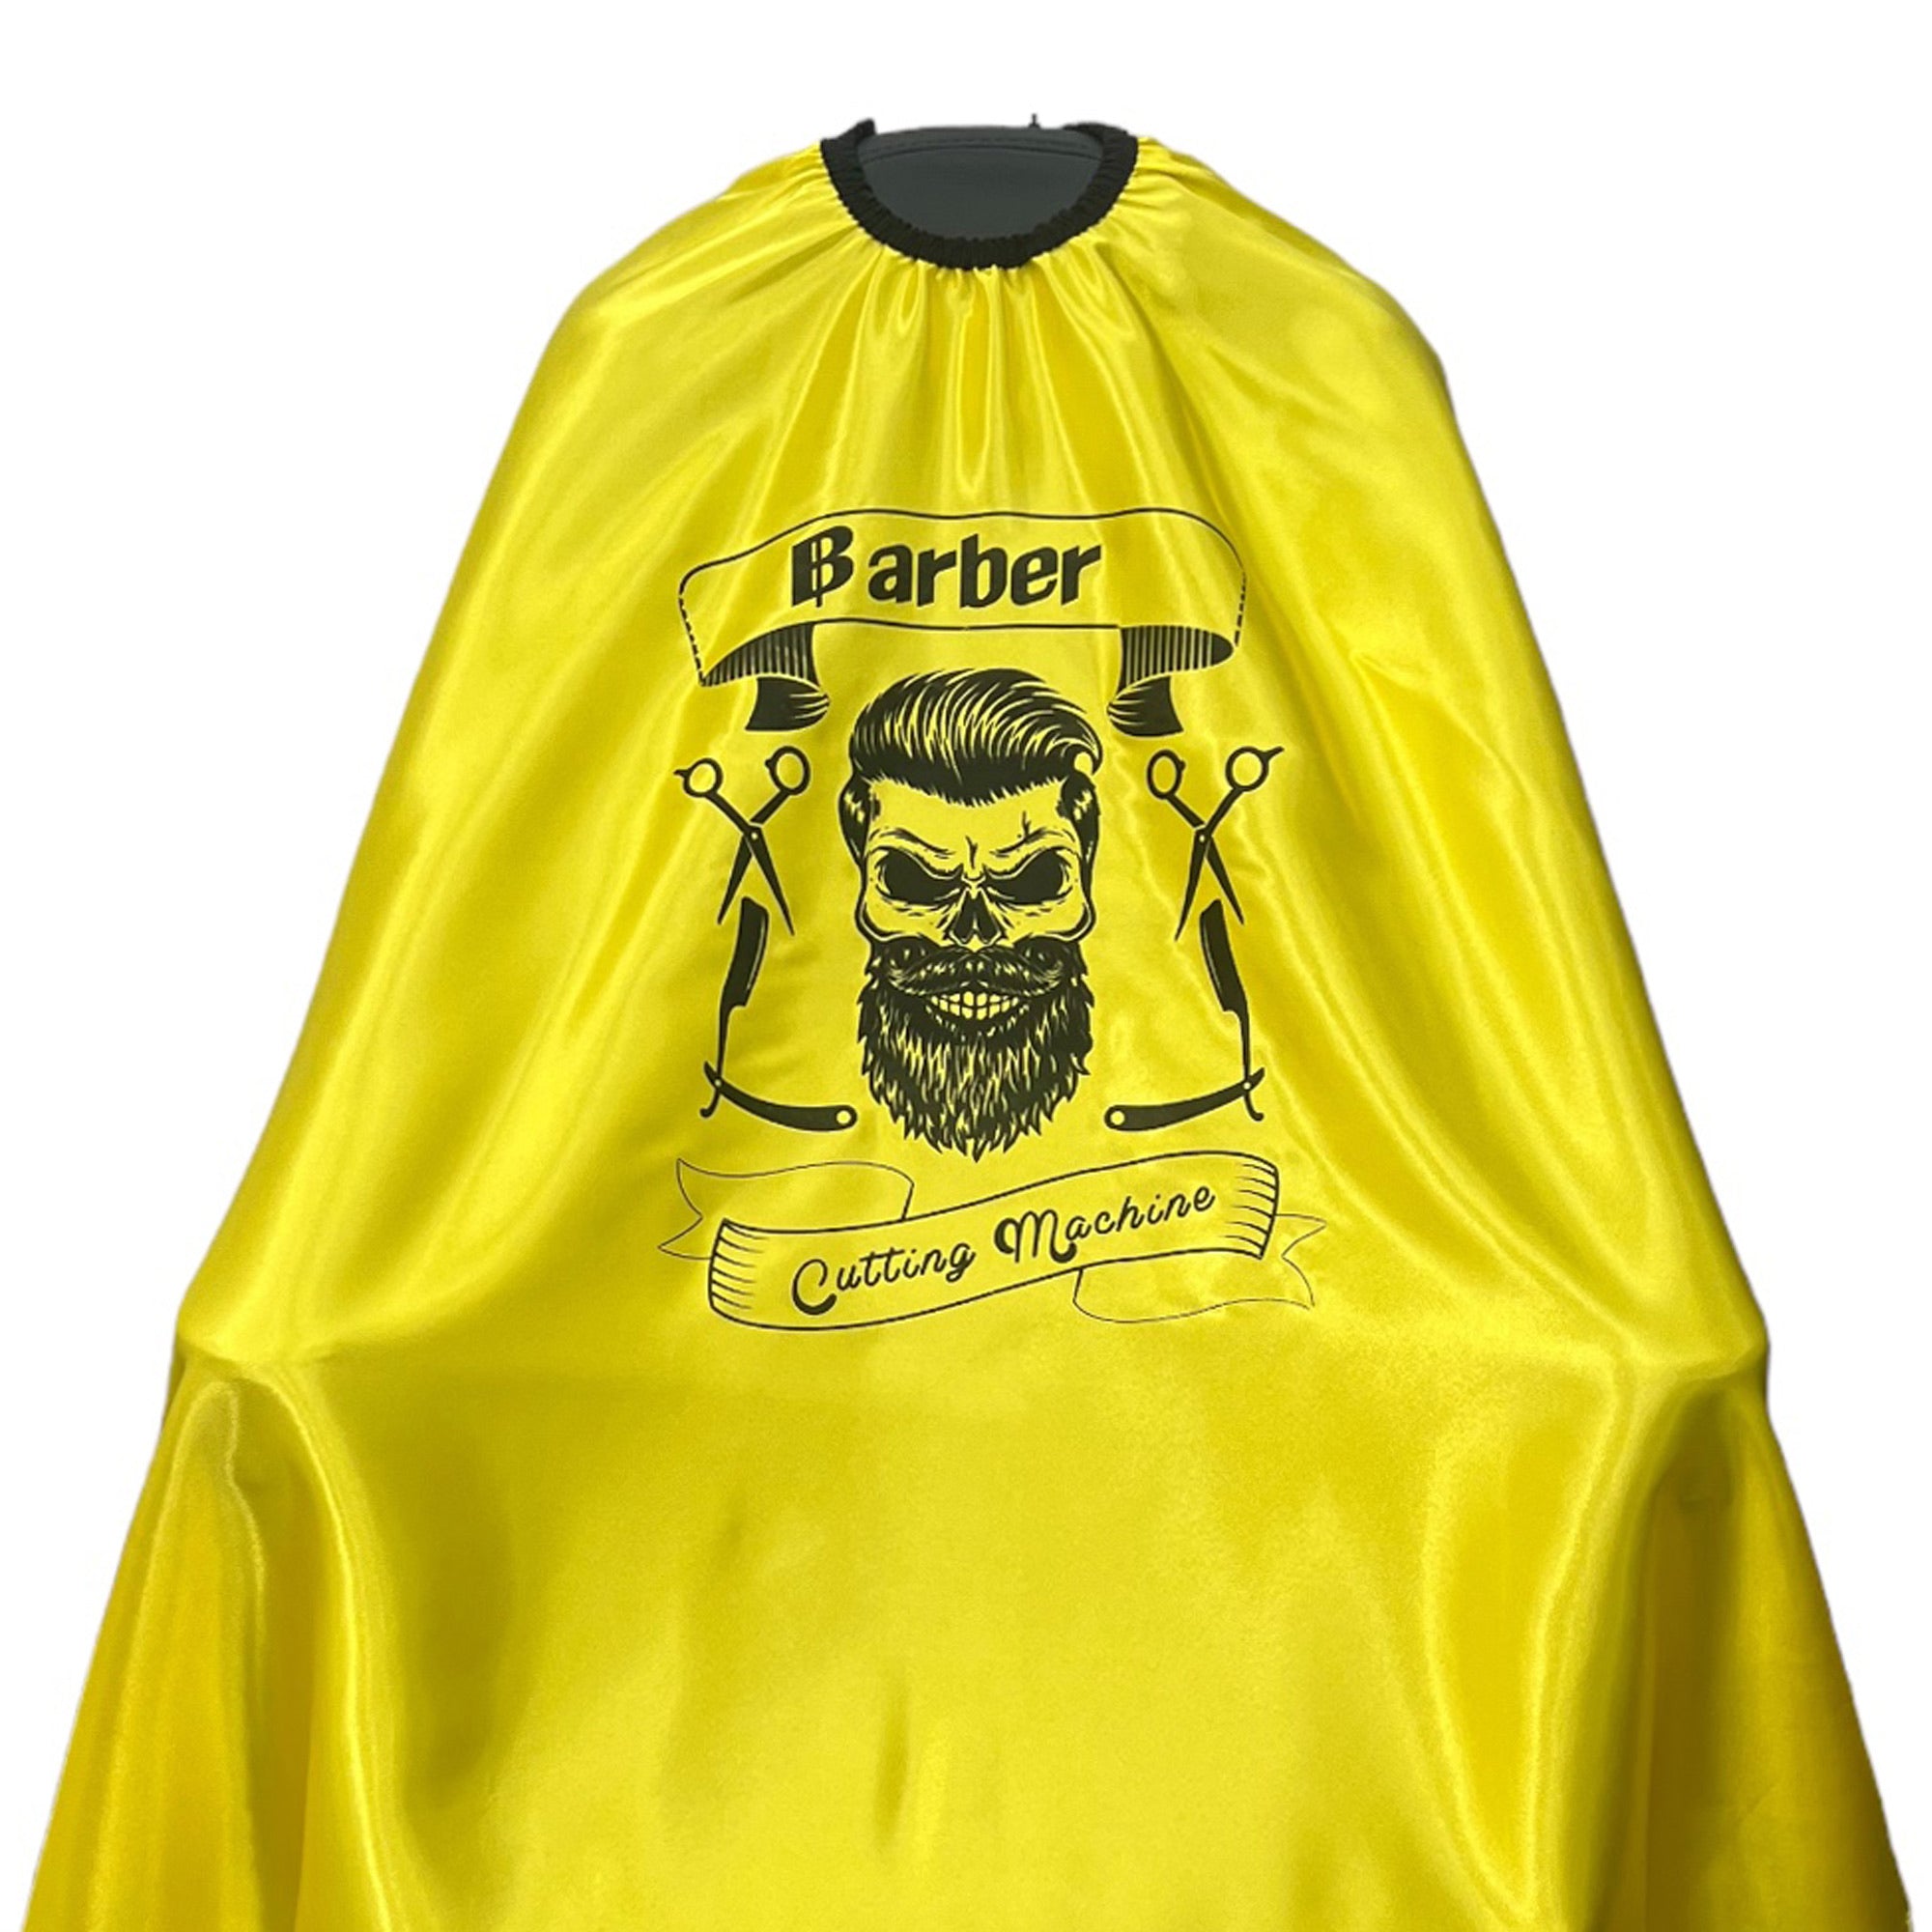 Gabri - Barber Hairdressing Hair Cutting Capes & Gowns Skull Pattern (Yellow)